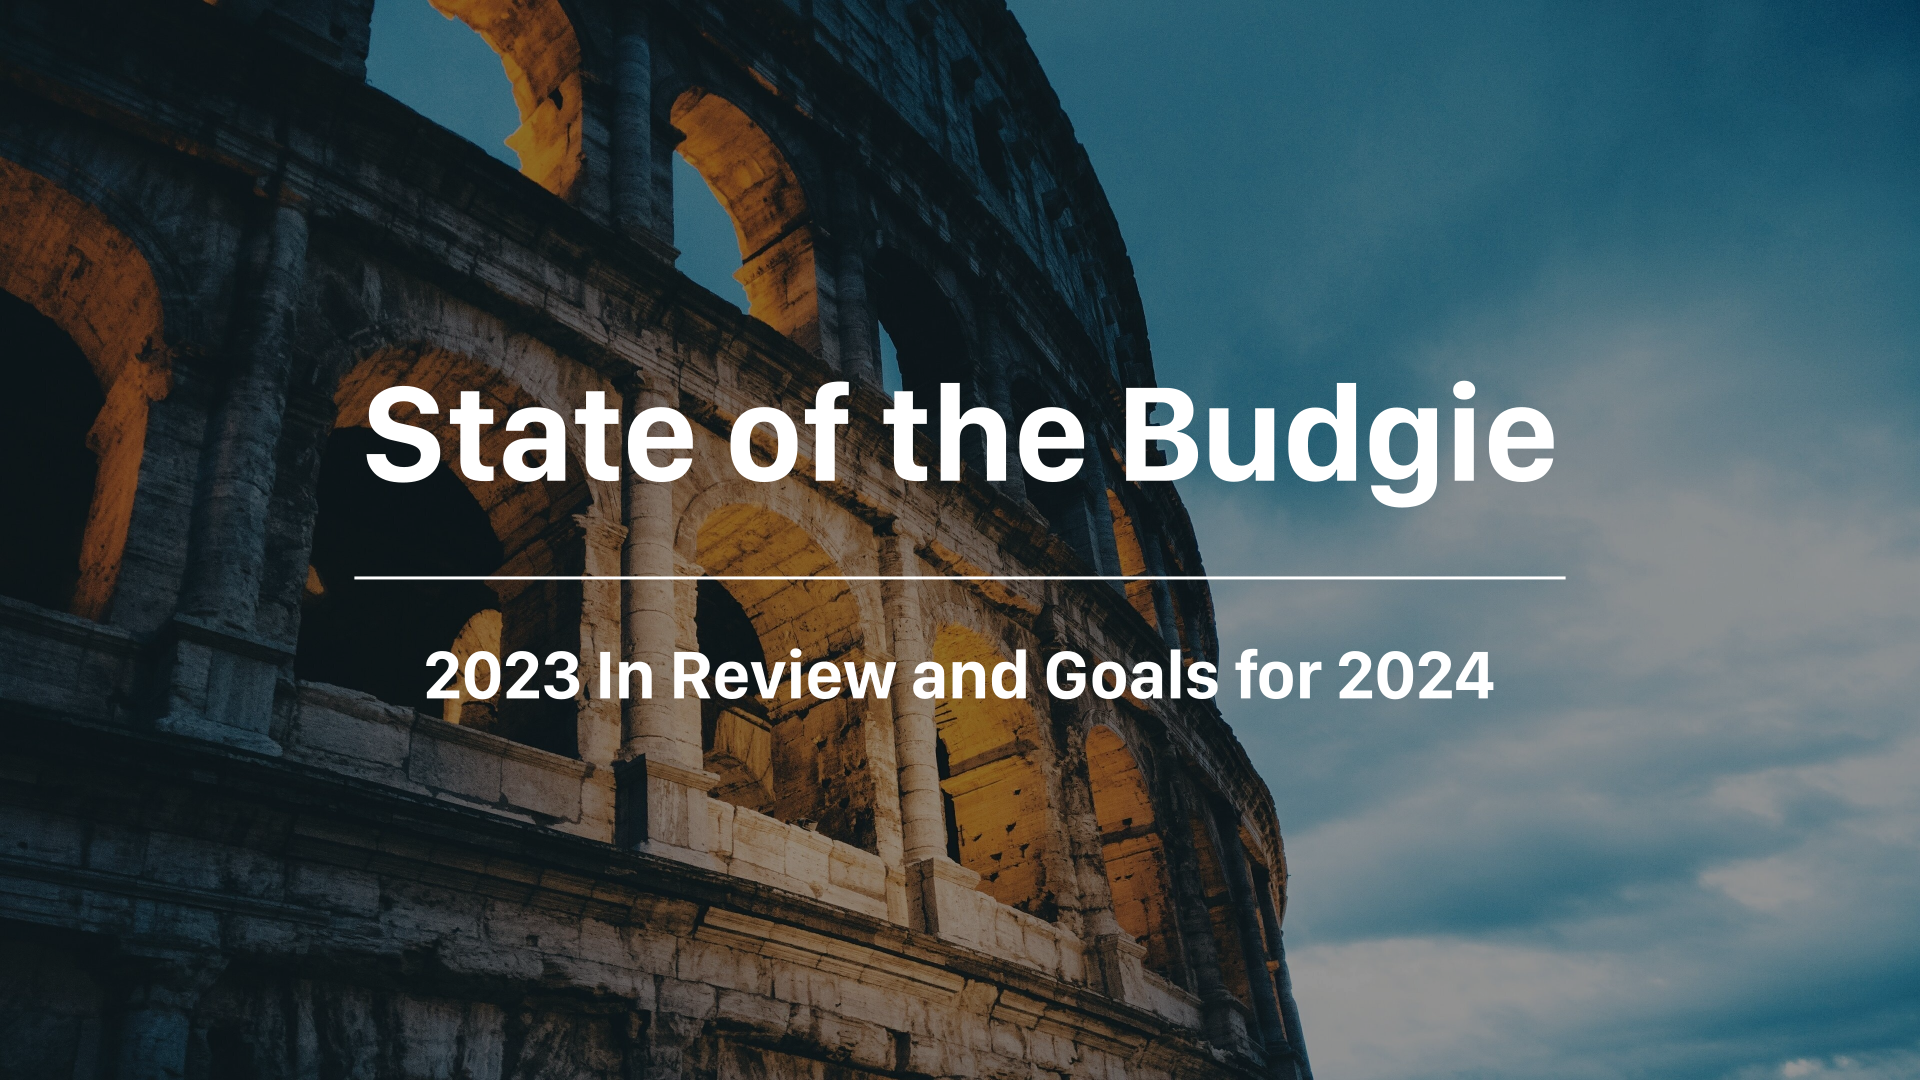 State of the Budgie: 2023 In Review and Goals for 2024